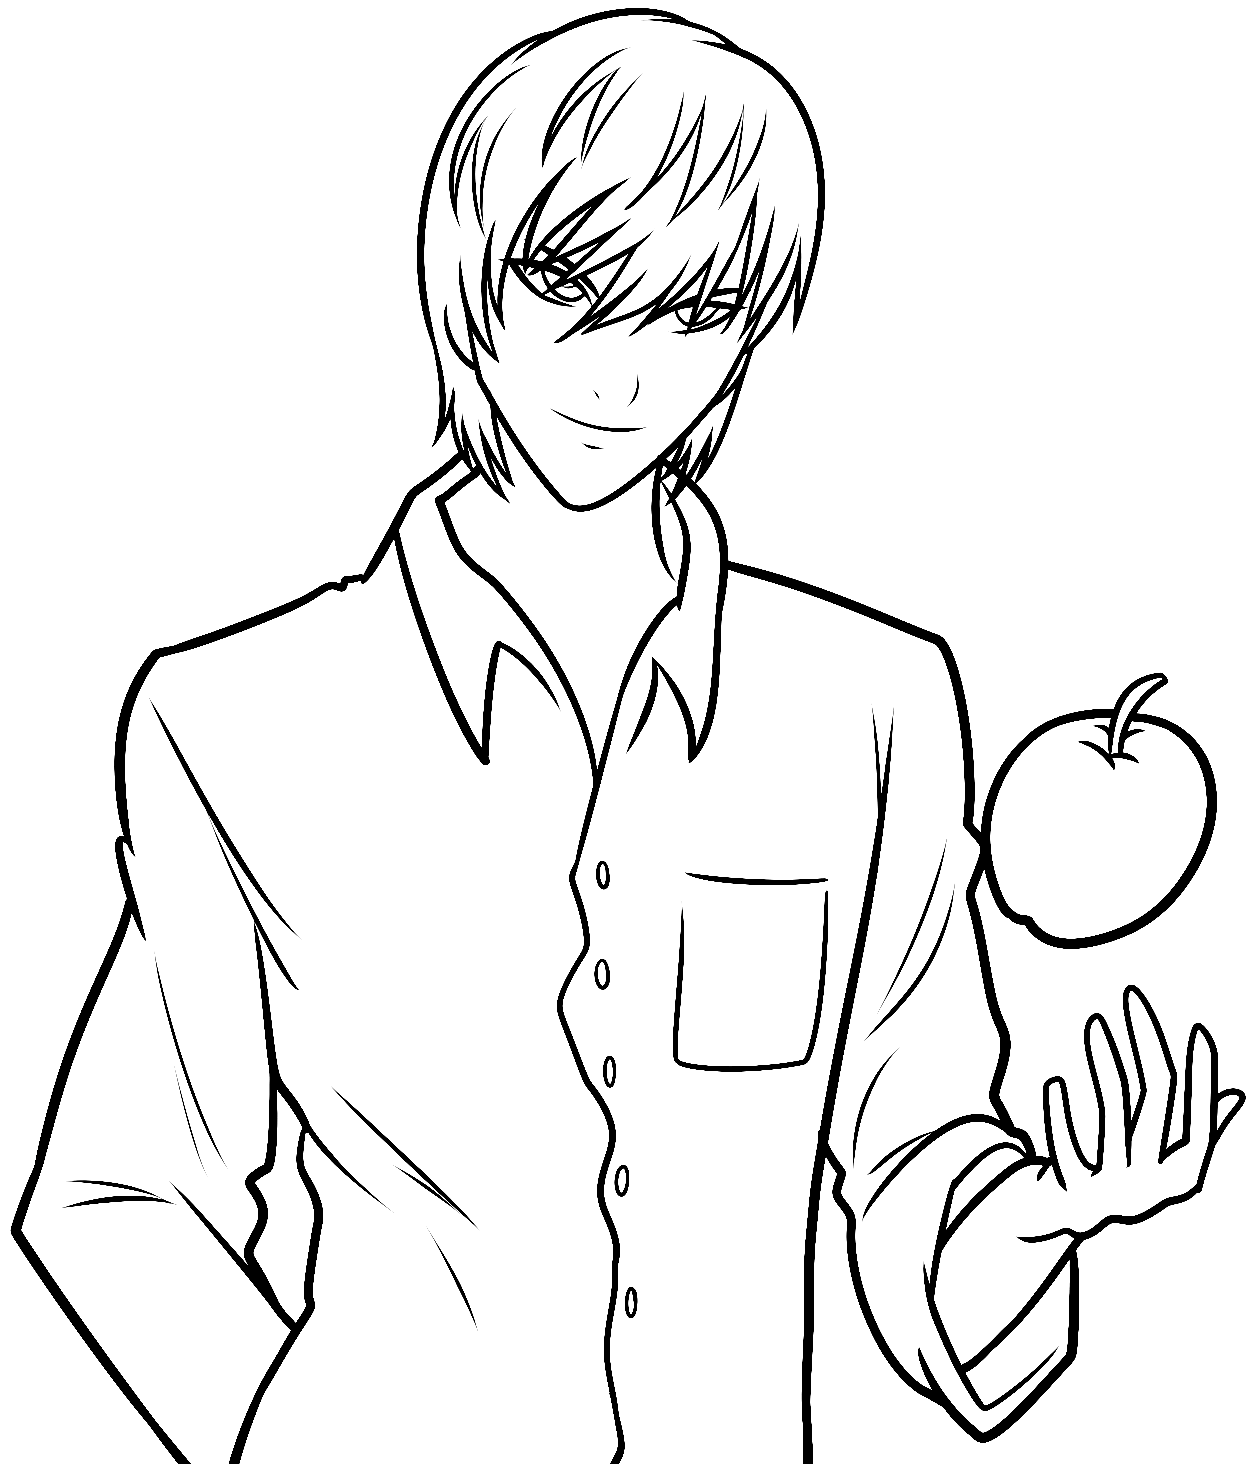 Yagami with Apple Coloring Page